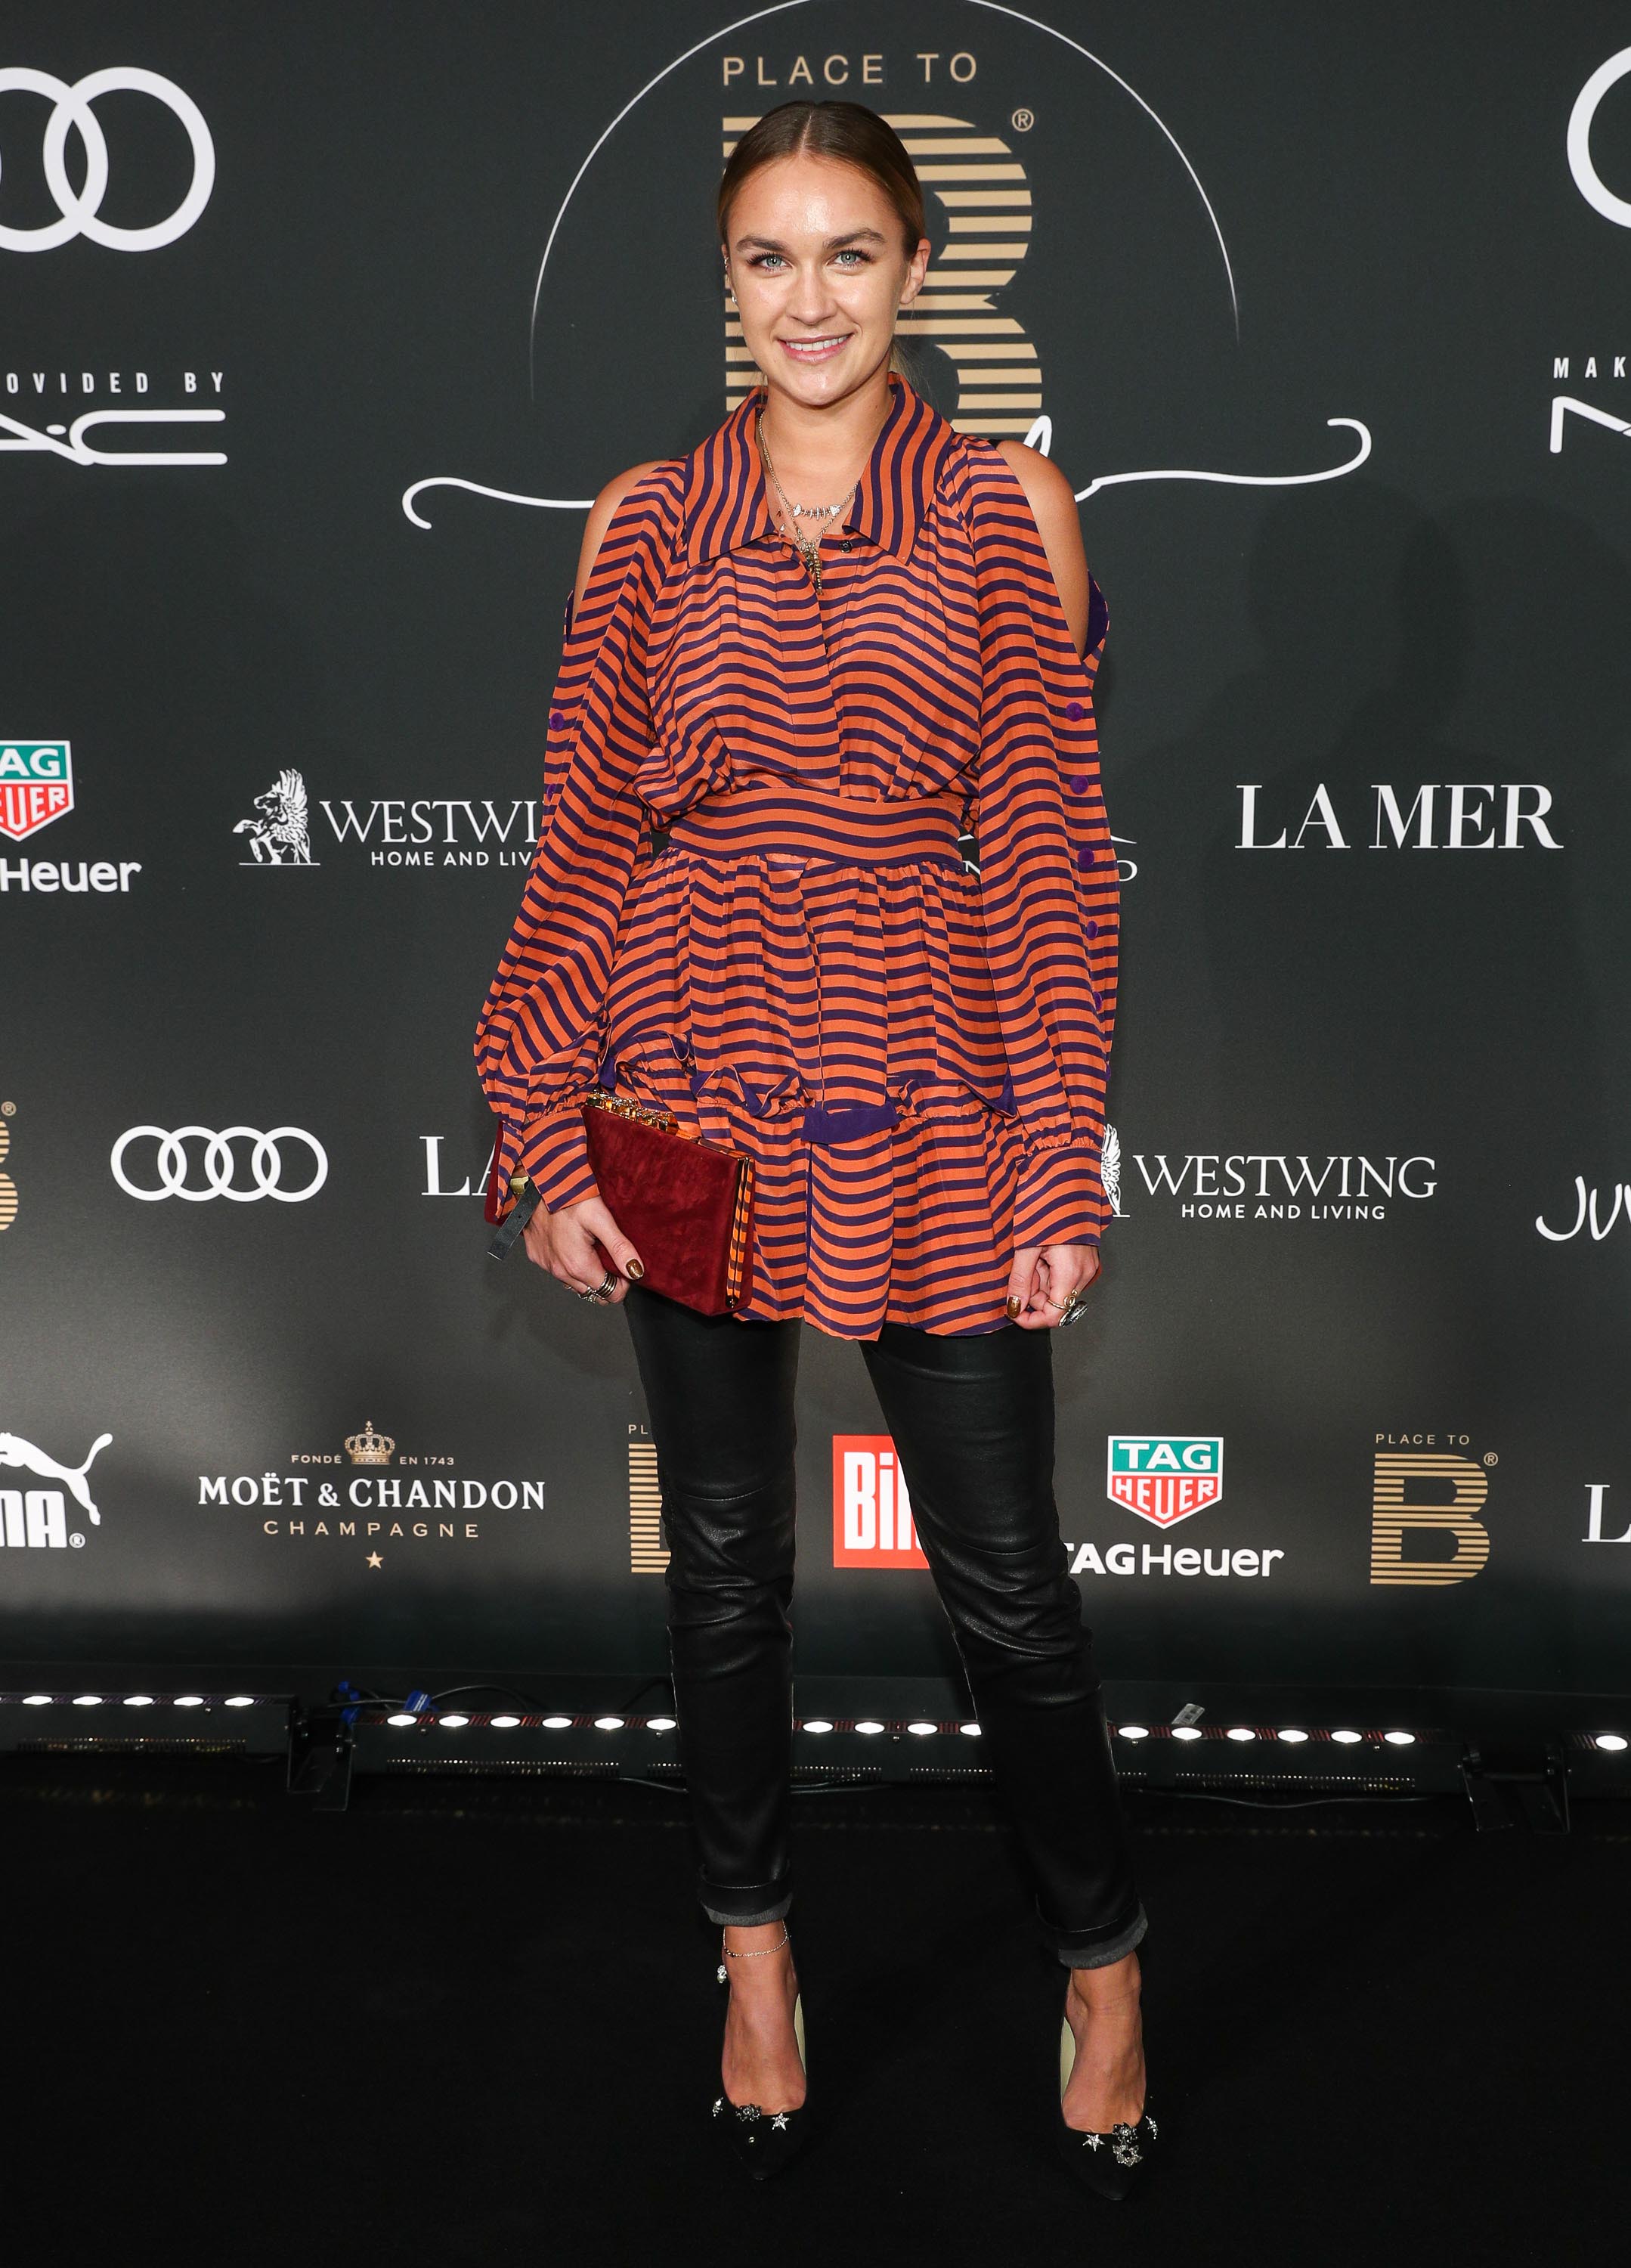 Nina Suess attends the Place To B Influencer Award